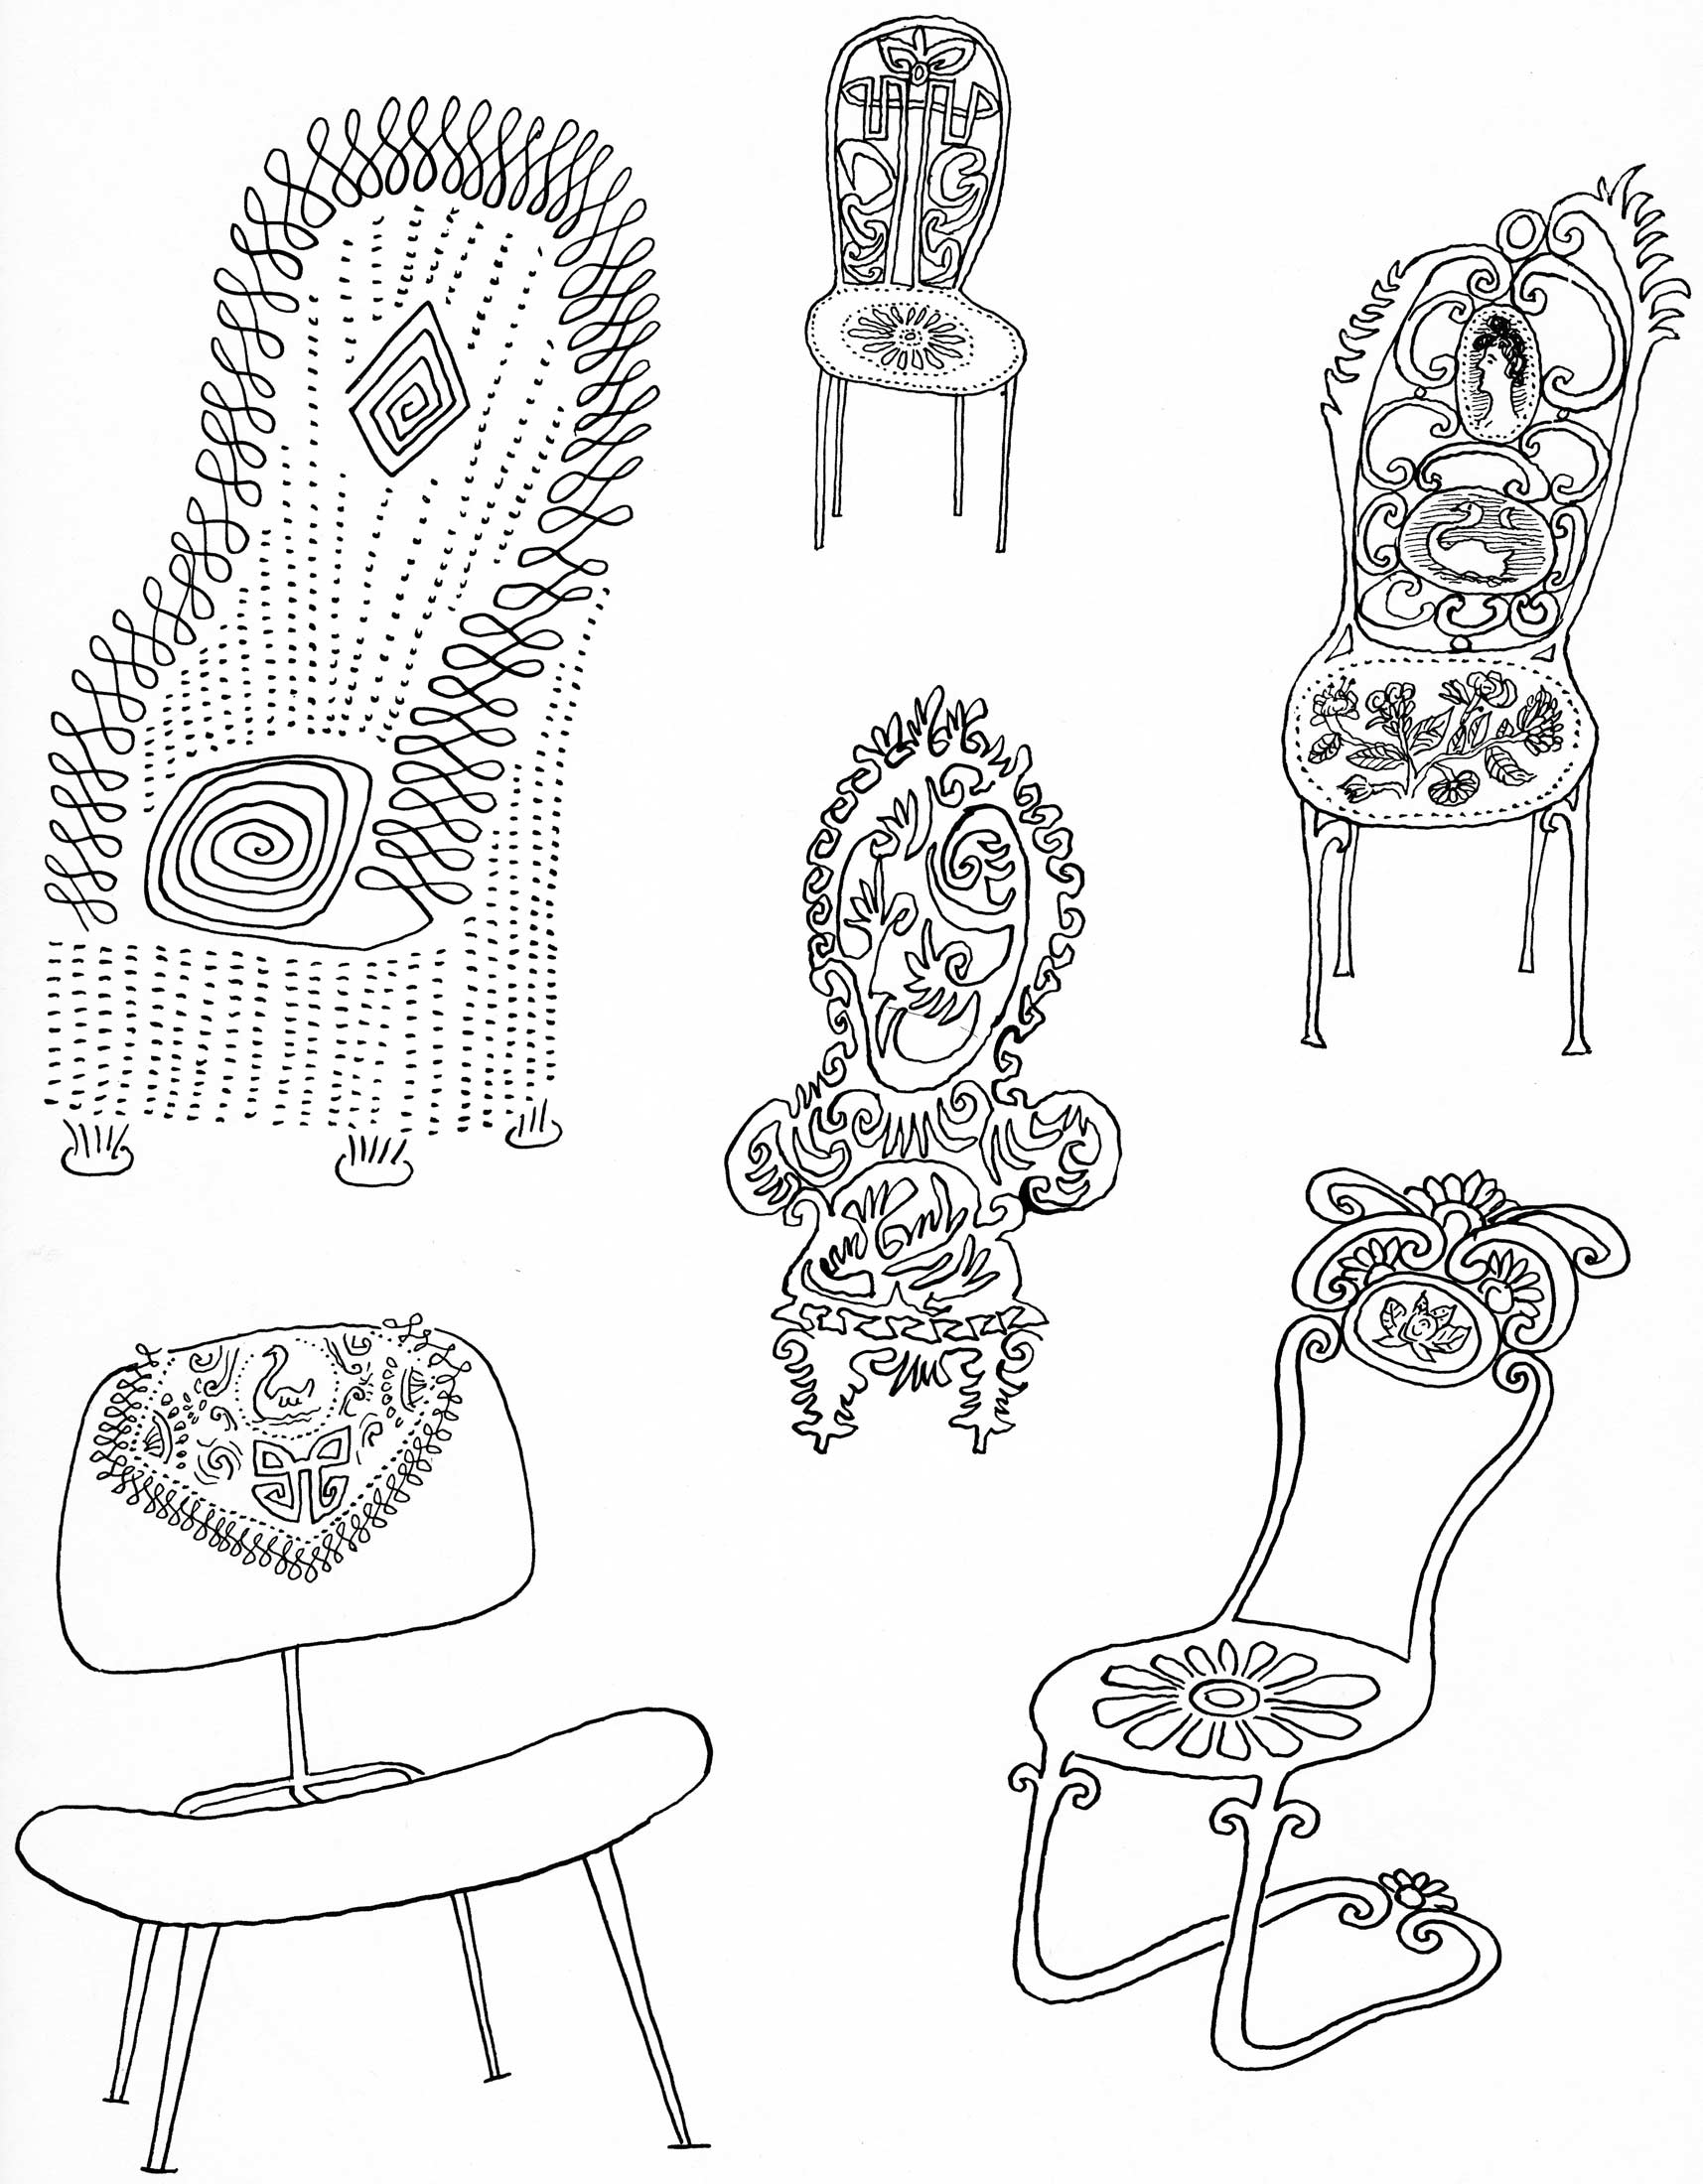 Page of lampoons of chair designs from <em>The Art of Living</em>, 1949.